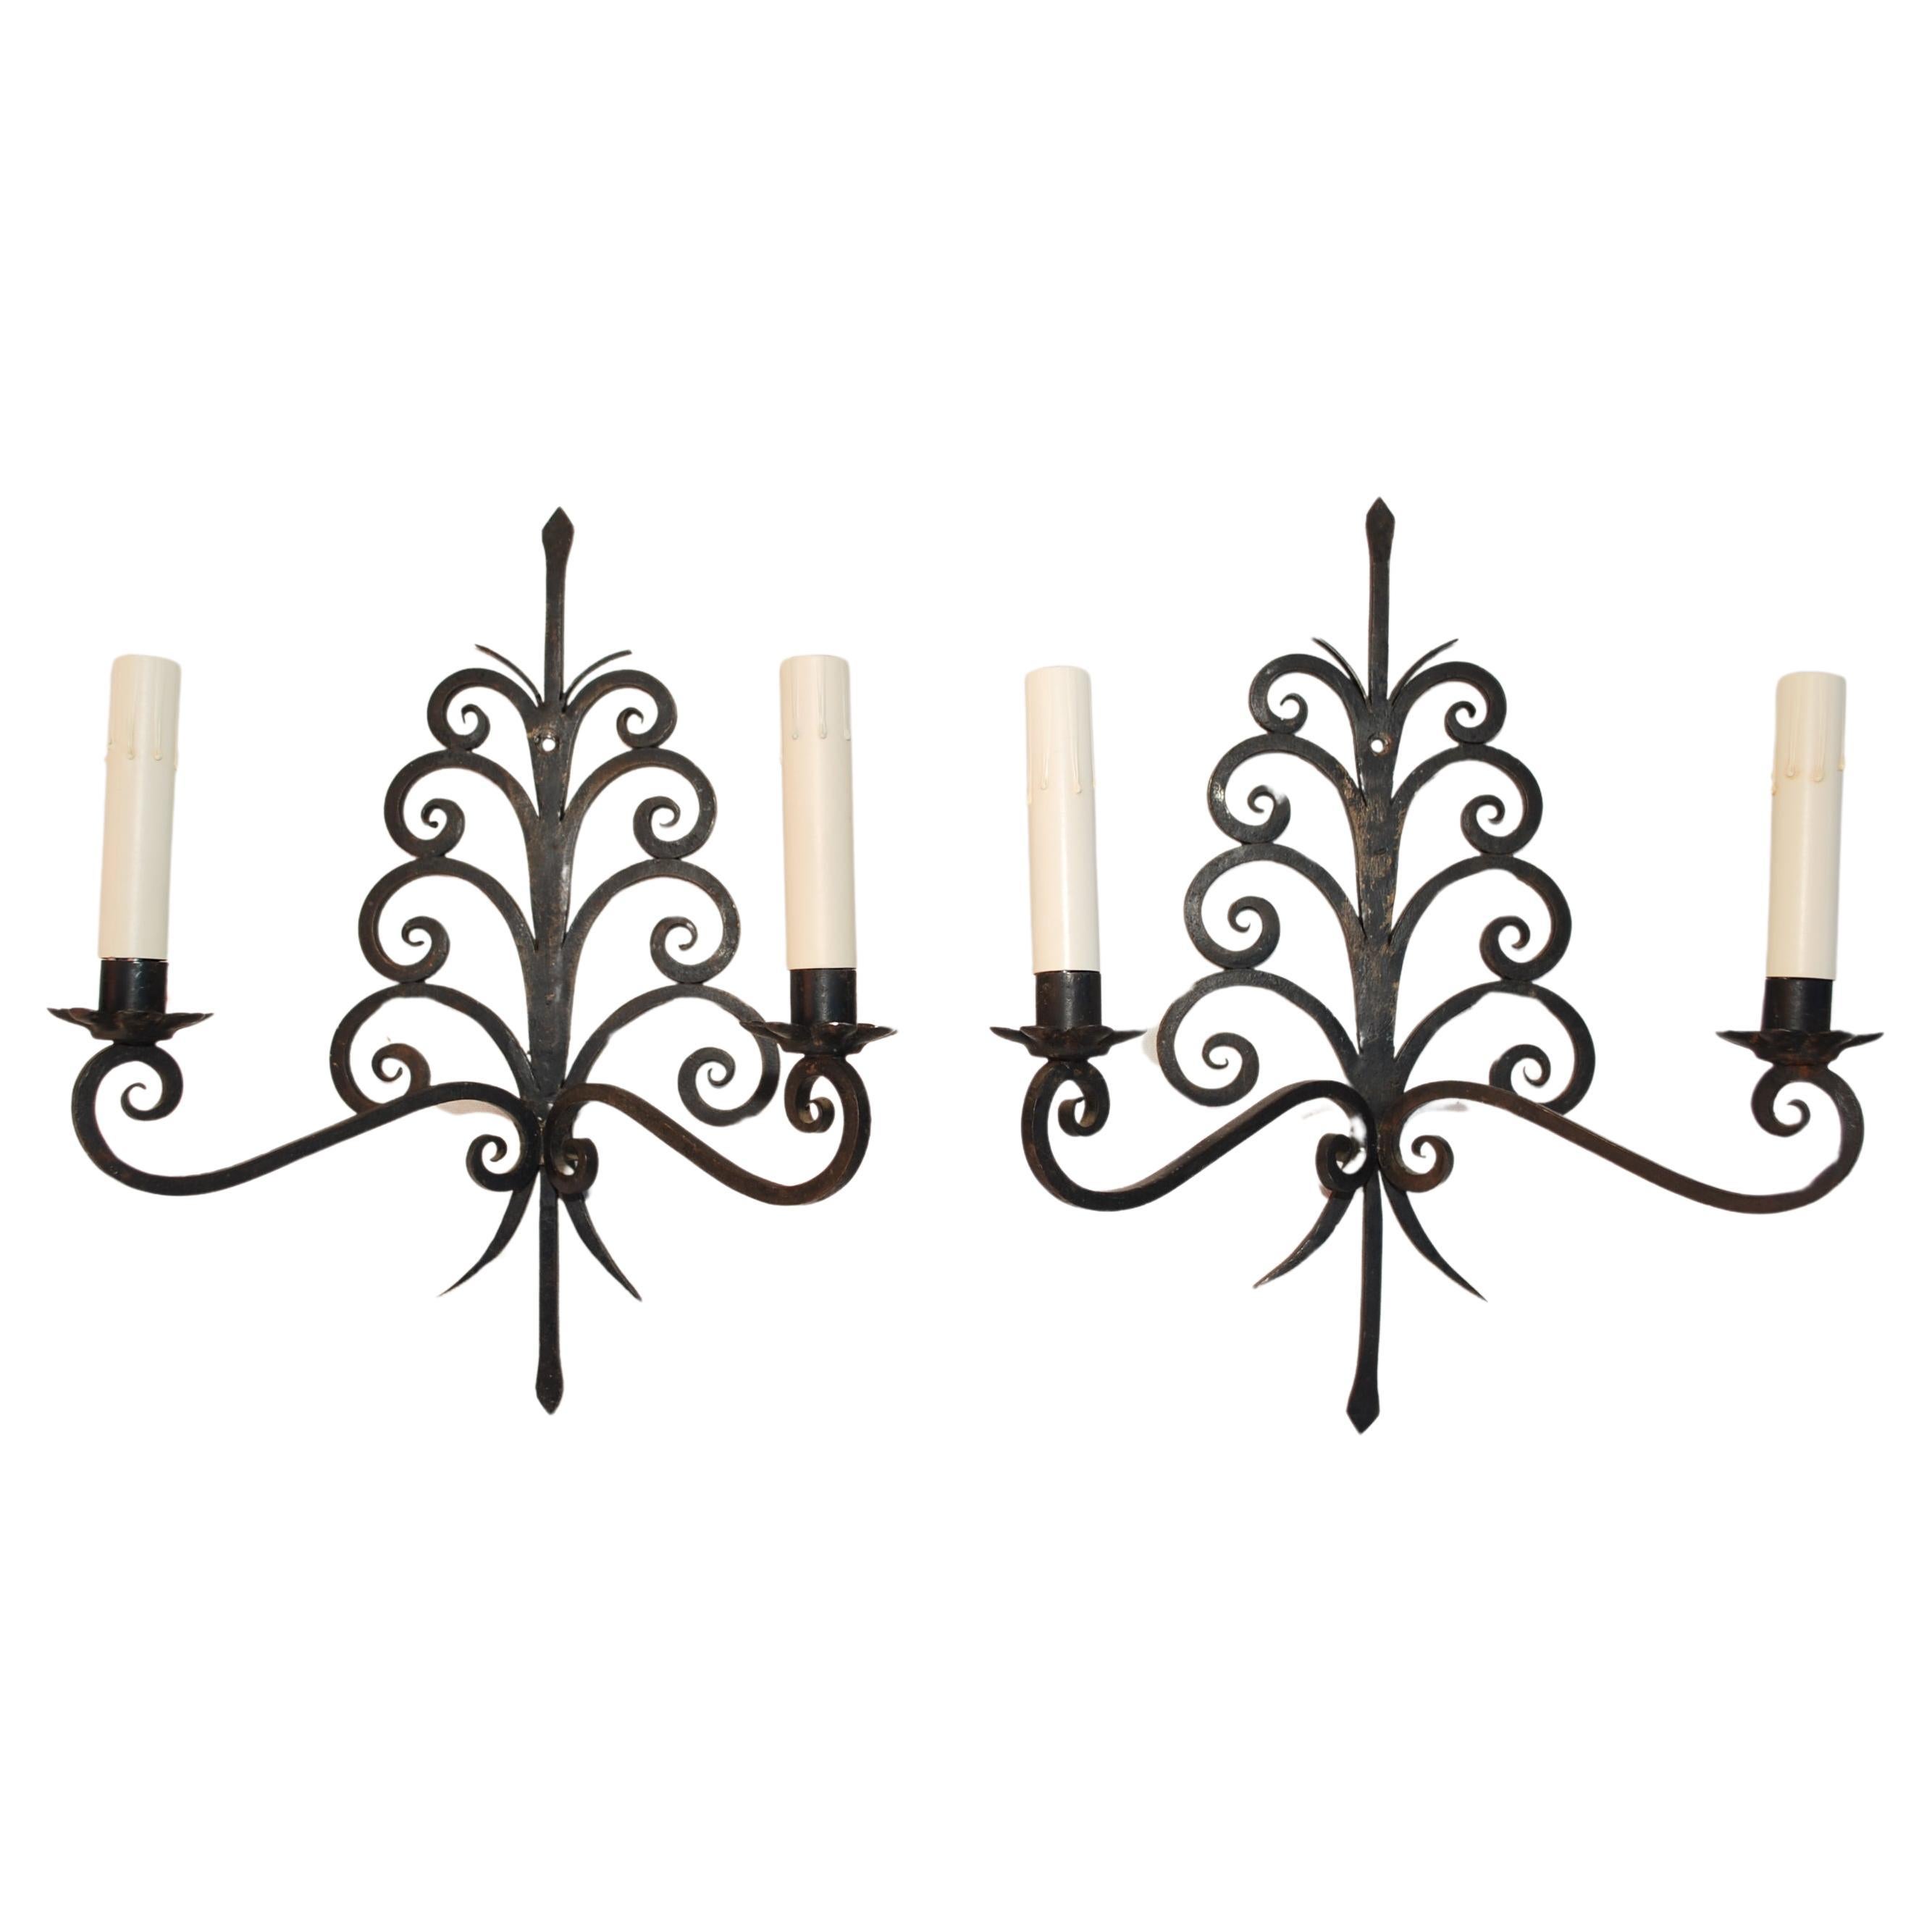 Elegant pair of 1920's French wrought iron sconces For Sale